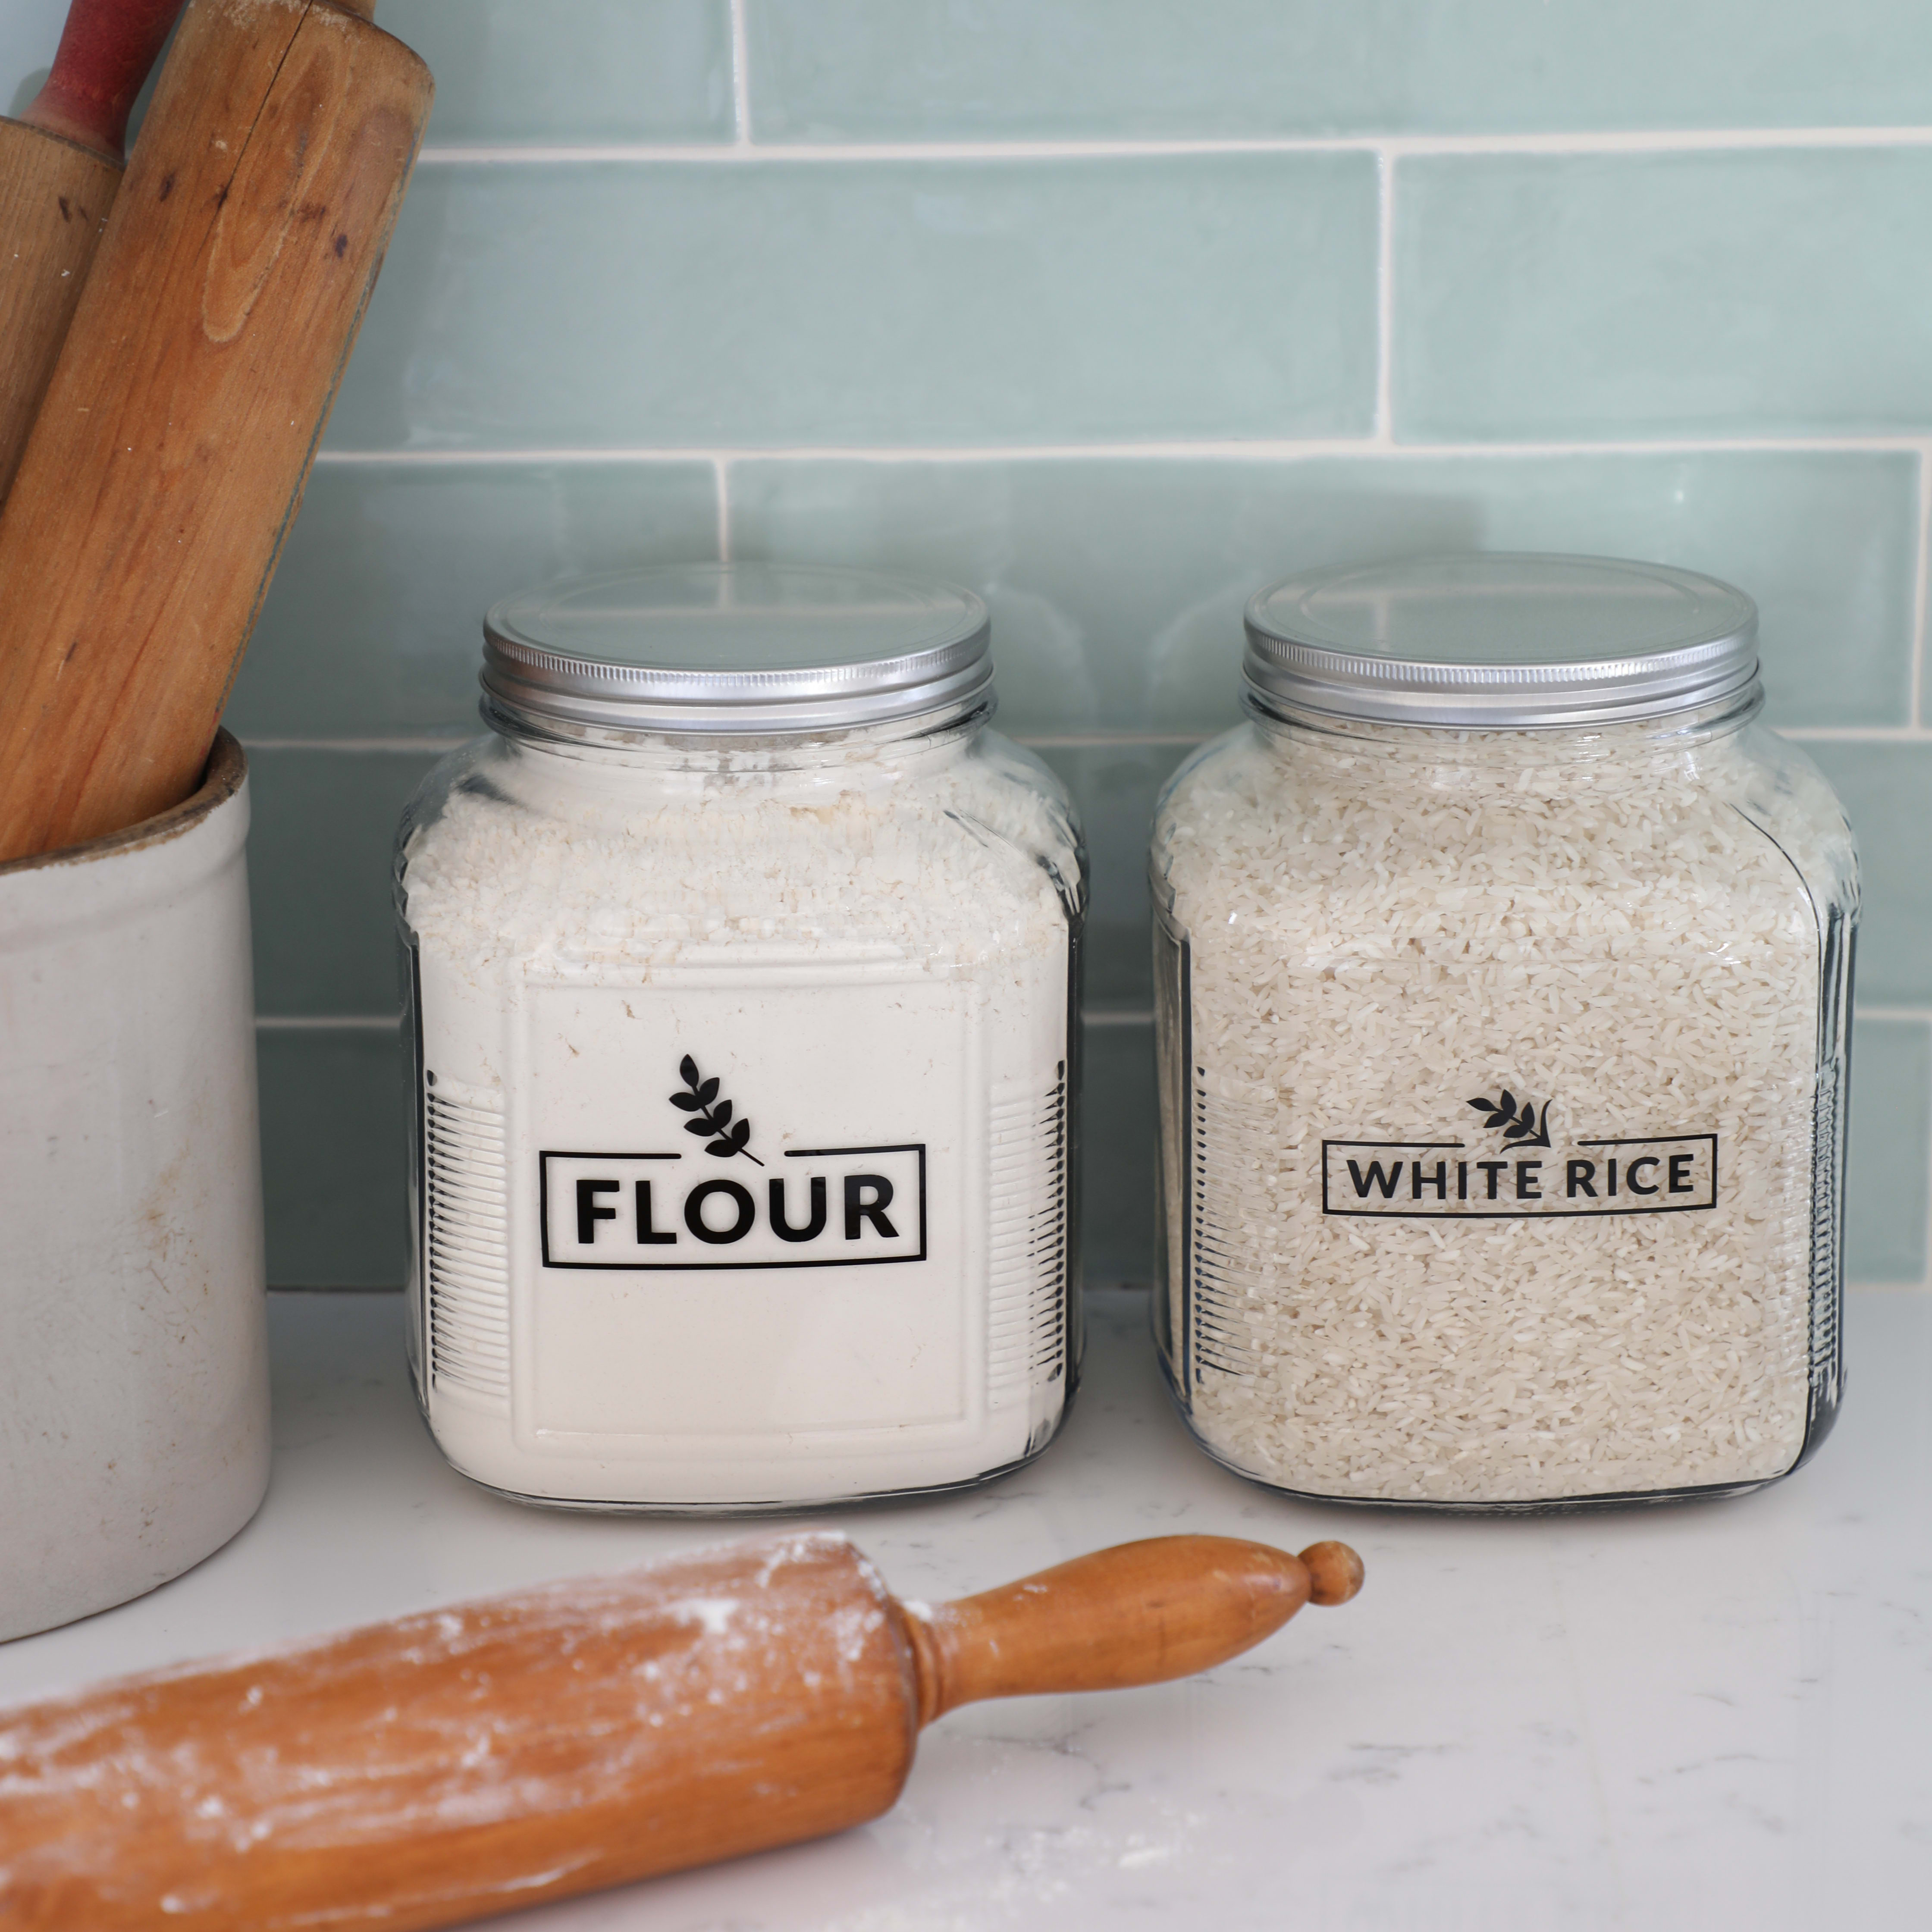 How to Label Spices, Grains, Flours, Without Using a Label Maker